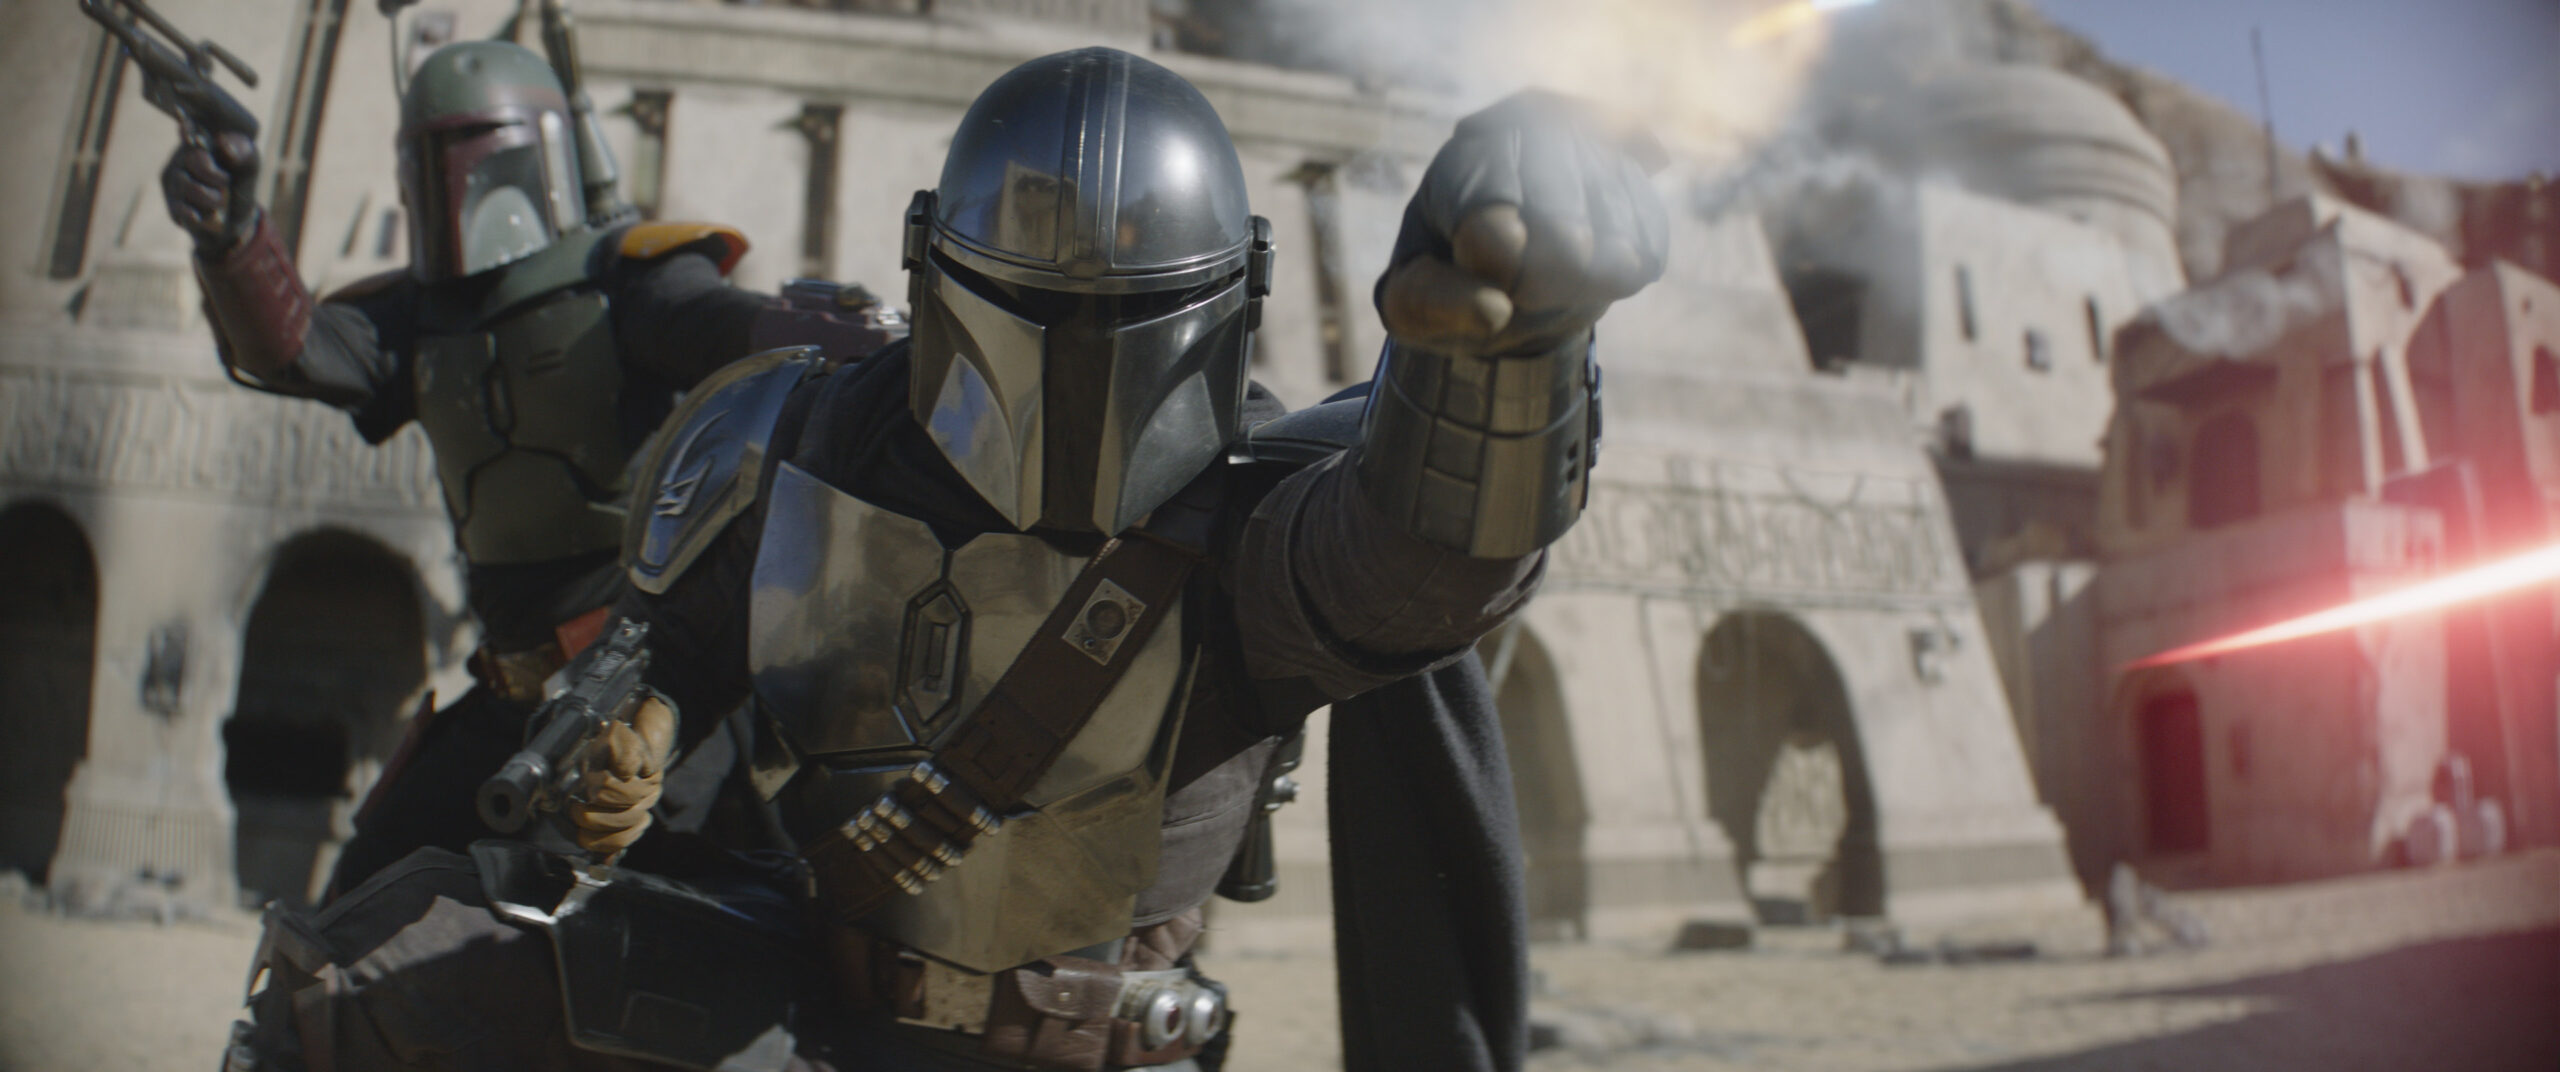 (L-R): Boba Fett (Temuera Morrison) and the Mandalorian (Pedro Pascal) in Lucasfilm's THE BOOK OF BOBA FETT, exclusively on Disney+. © 2022 Lucasfilm Ltd. & ™. All Rights Reserved.